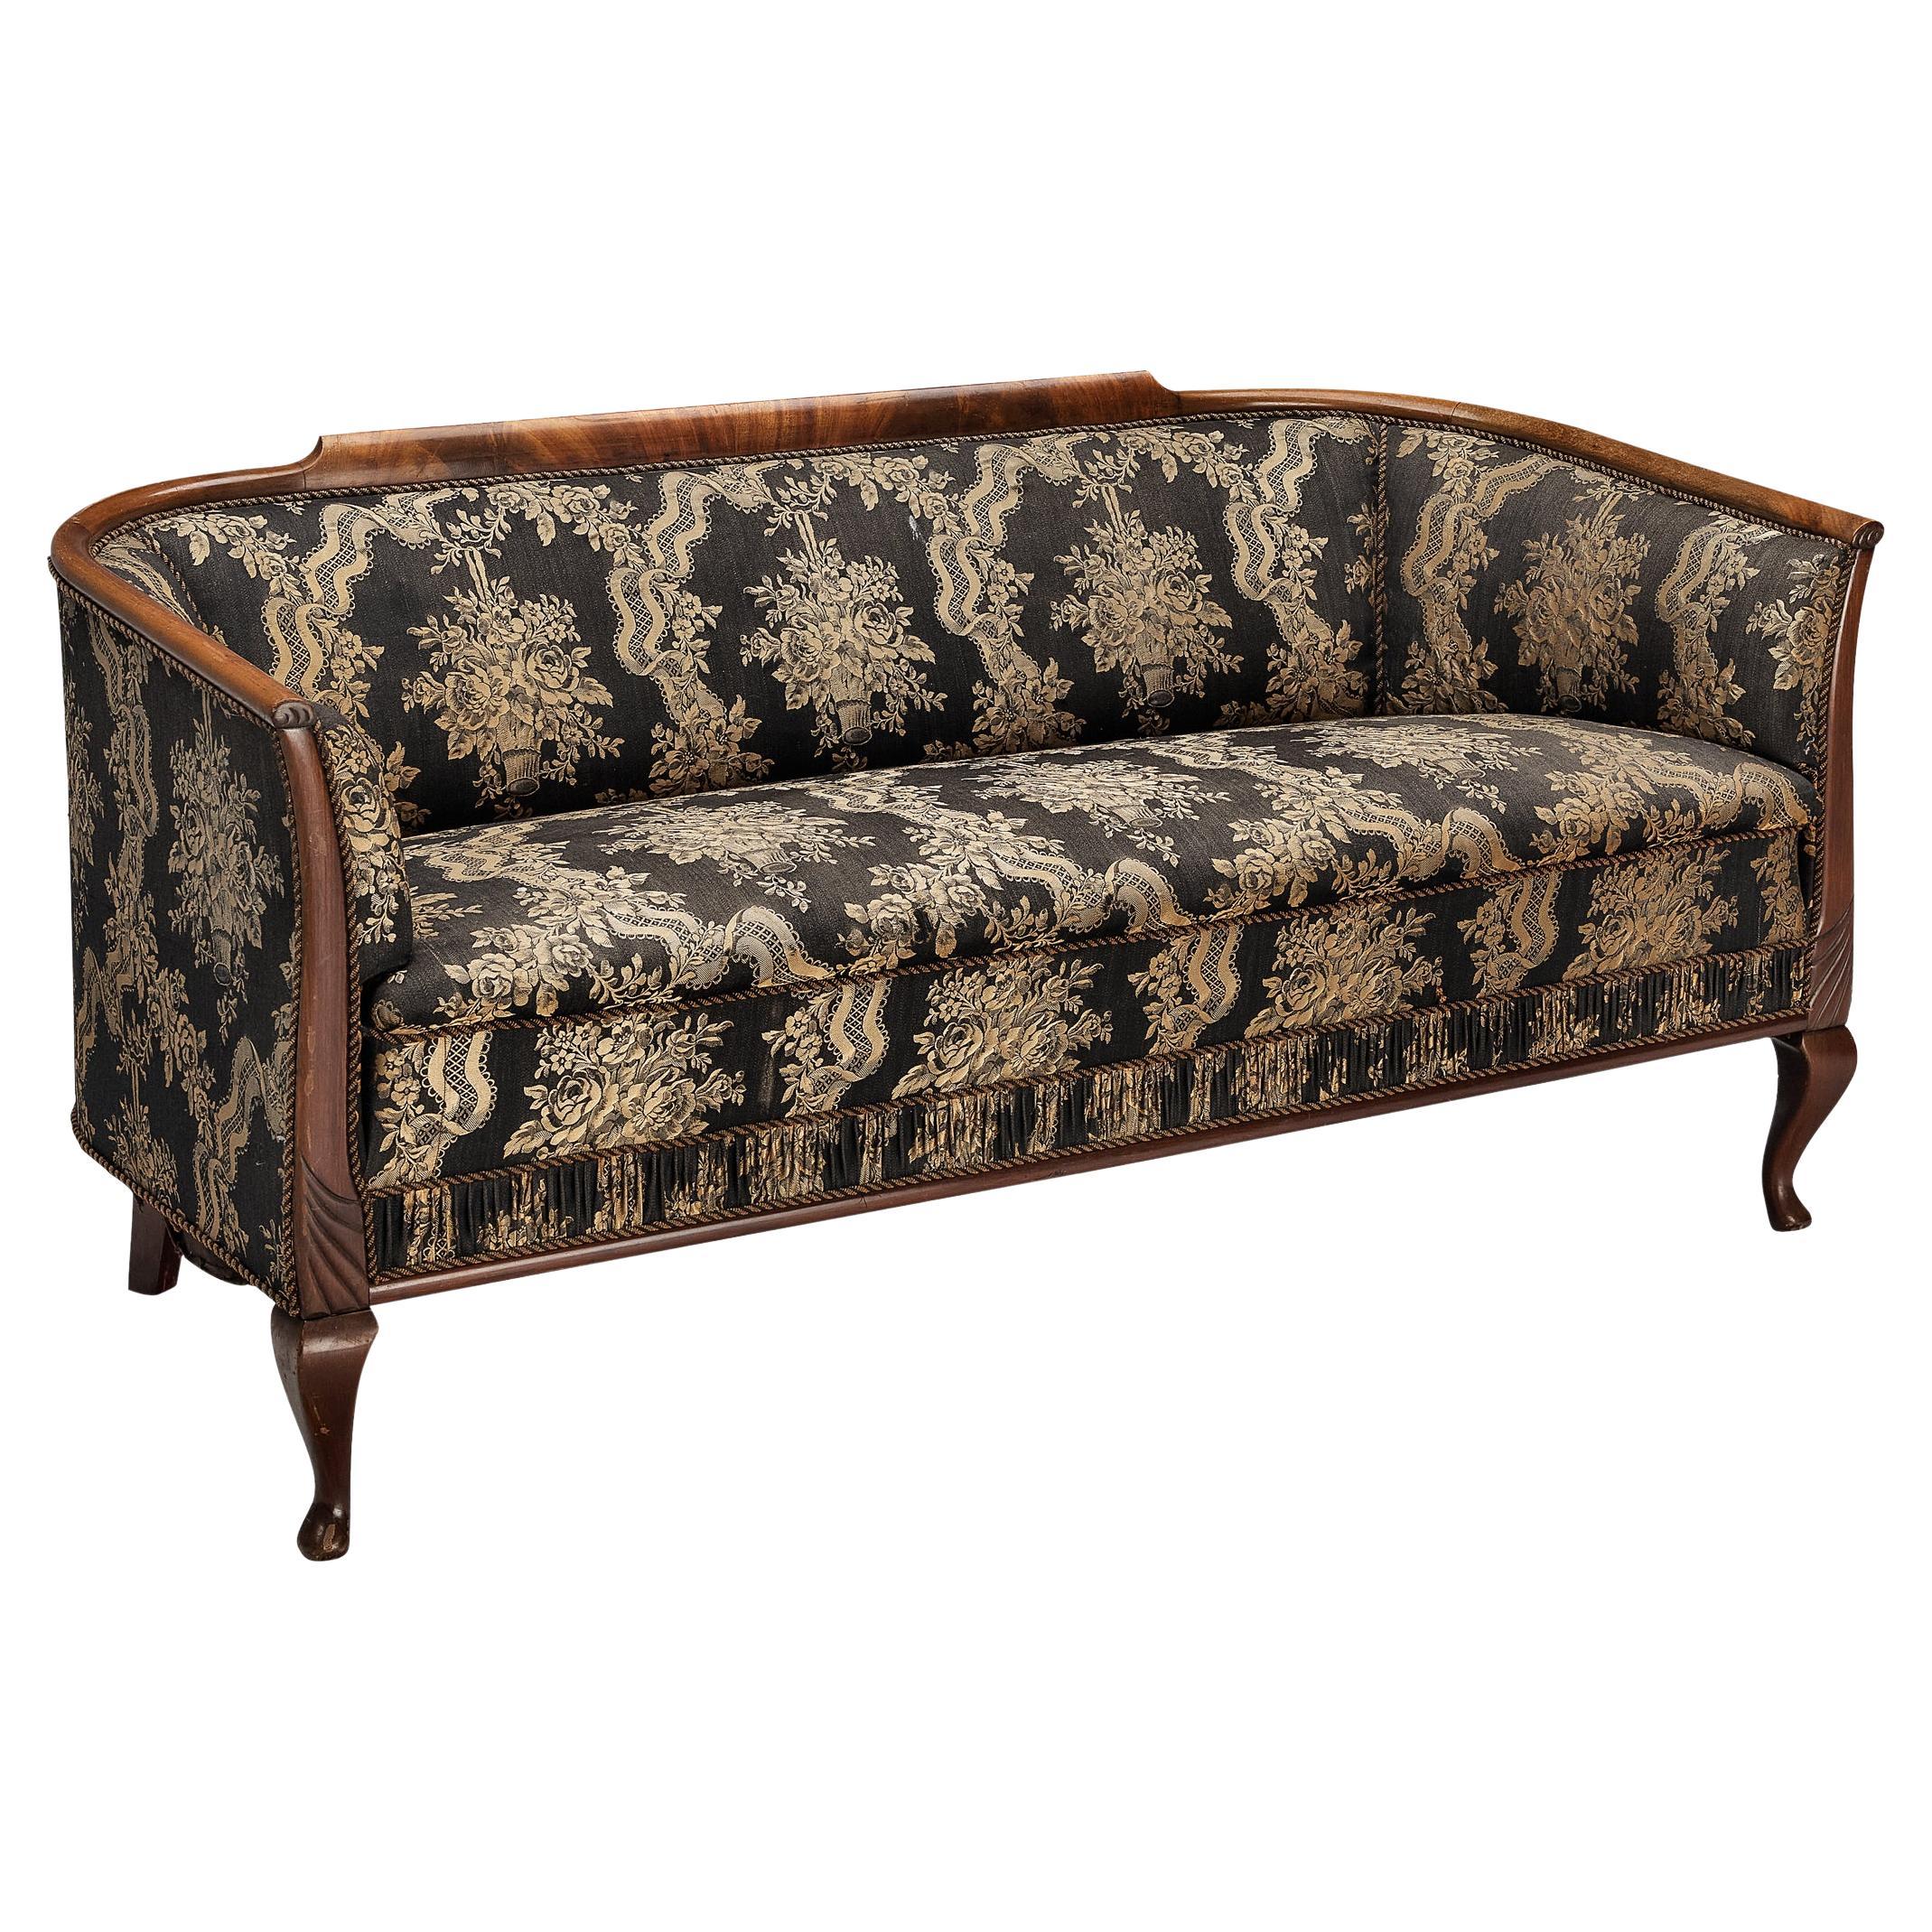 Danish Settee in Floral Upholstery